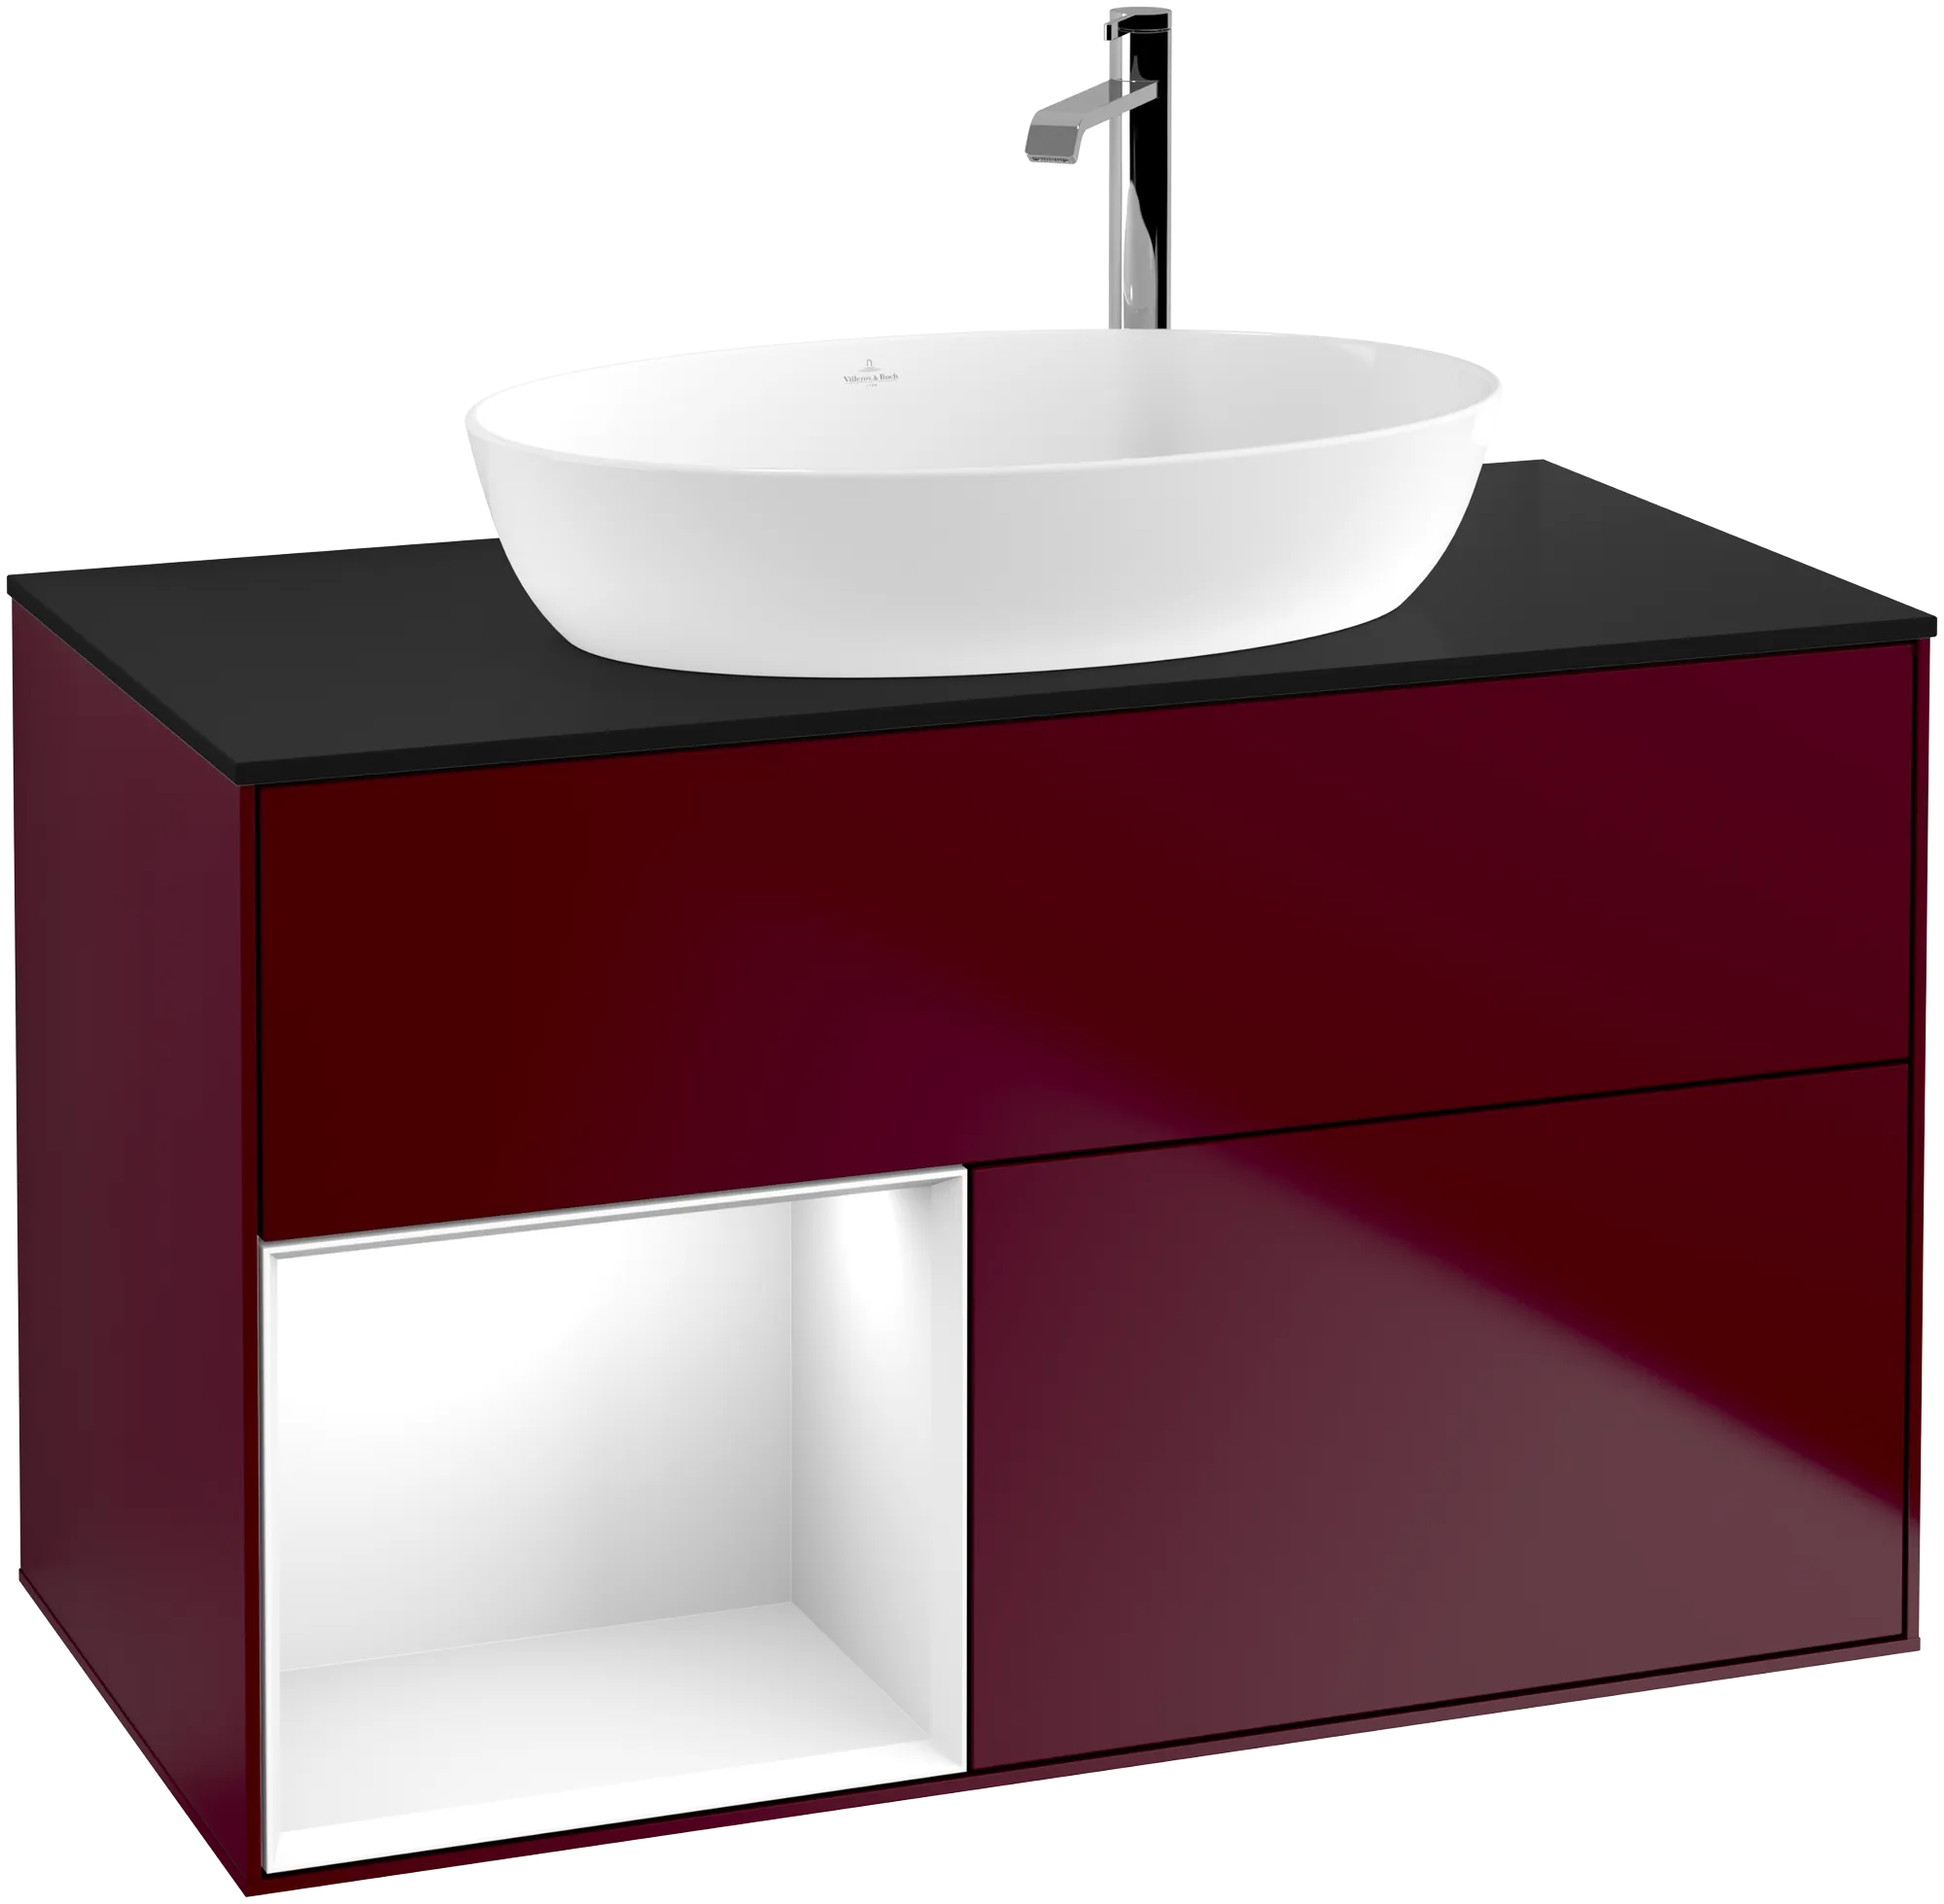 VILLEROY BOCH Finion Vanity unit, with lighting, 2 pull-out compartments, 1000 x 603 x 501 mm, Peony Matt Lacquer / Glossy White Lacquer / Glass Black Matt #G892GFHB resmi